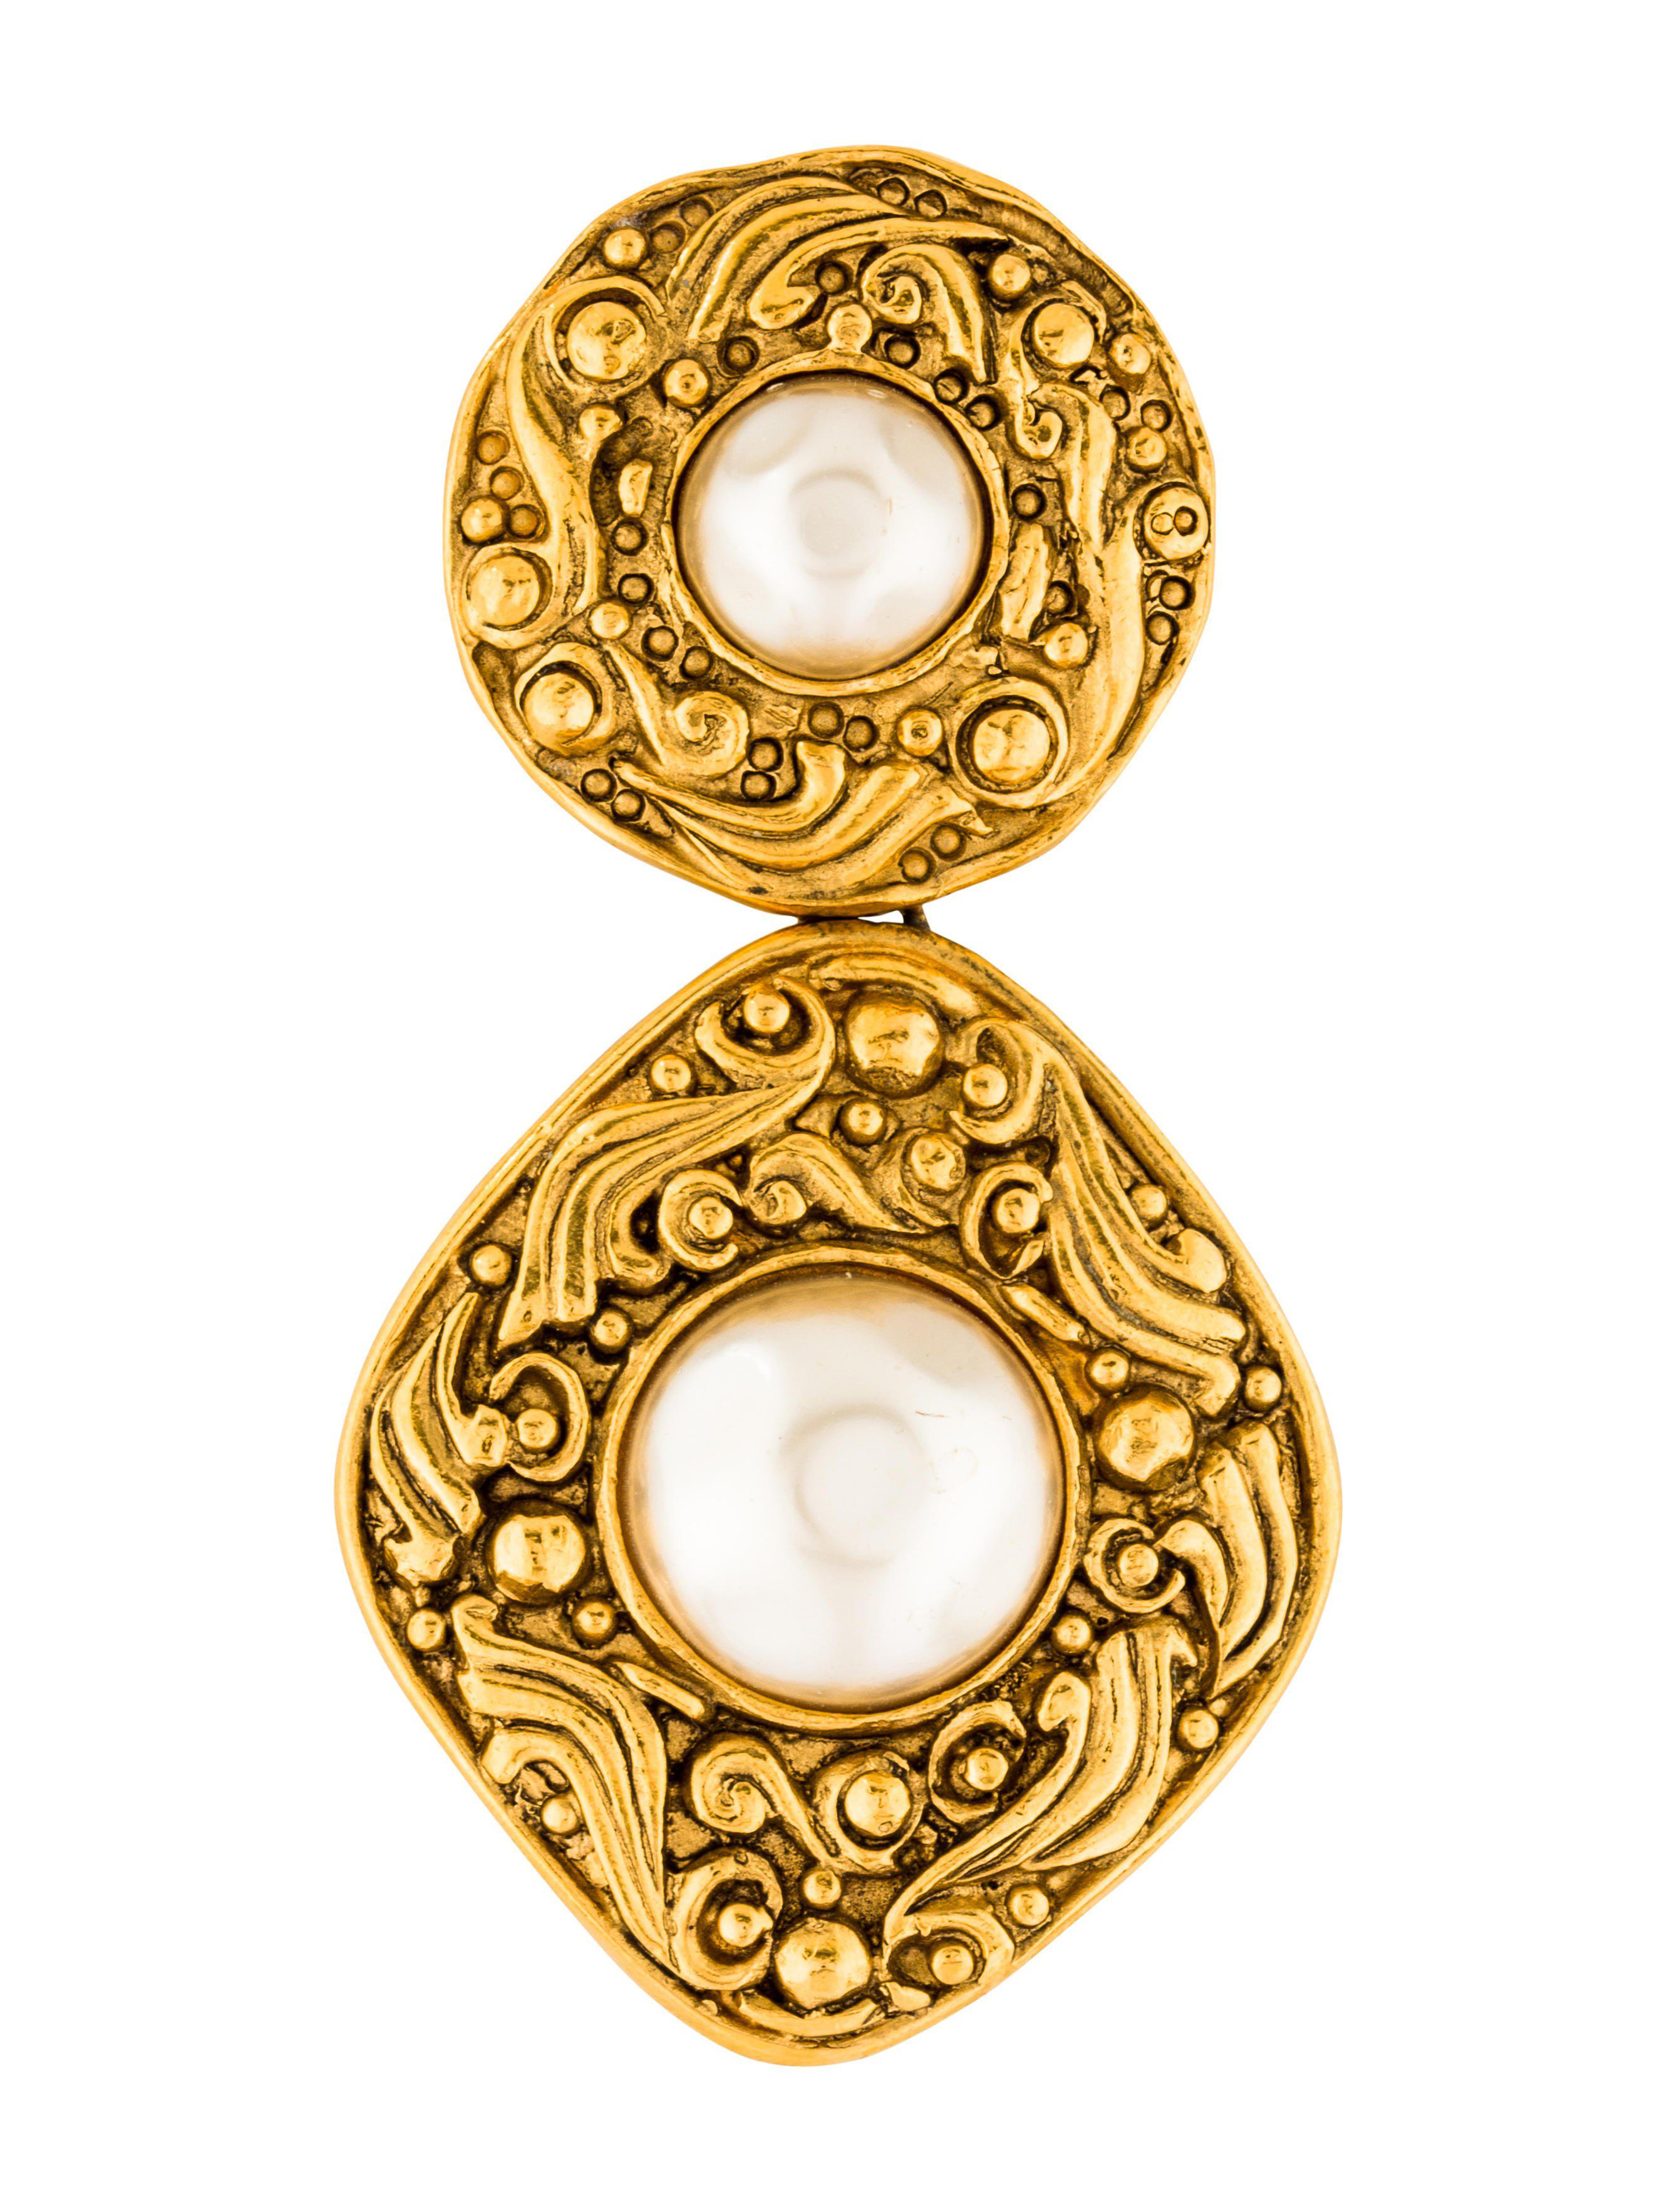 Lyst - Chanel Vintage Pearl Pin Gold in Metallic